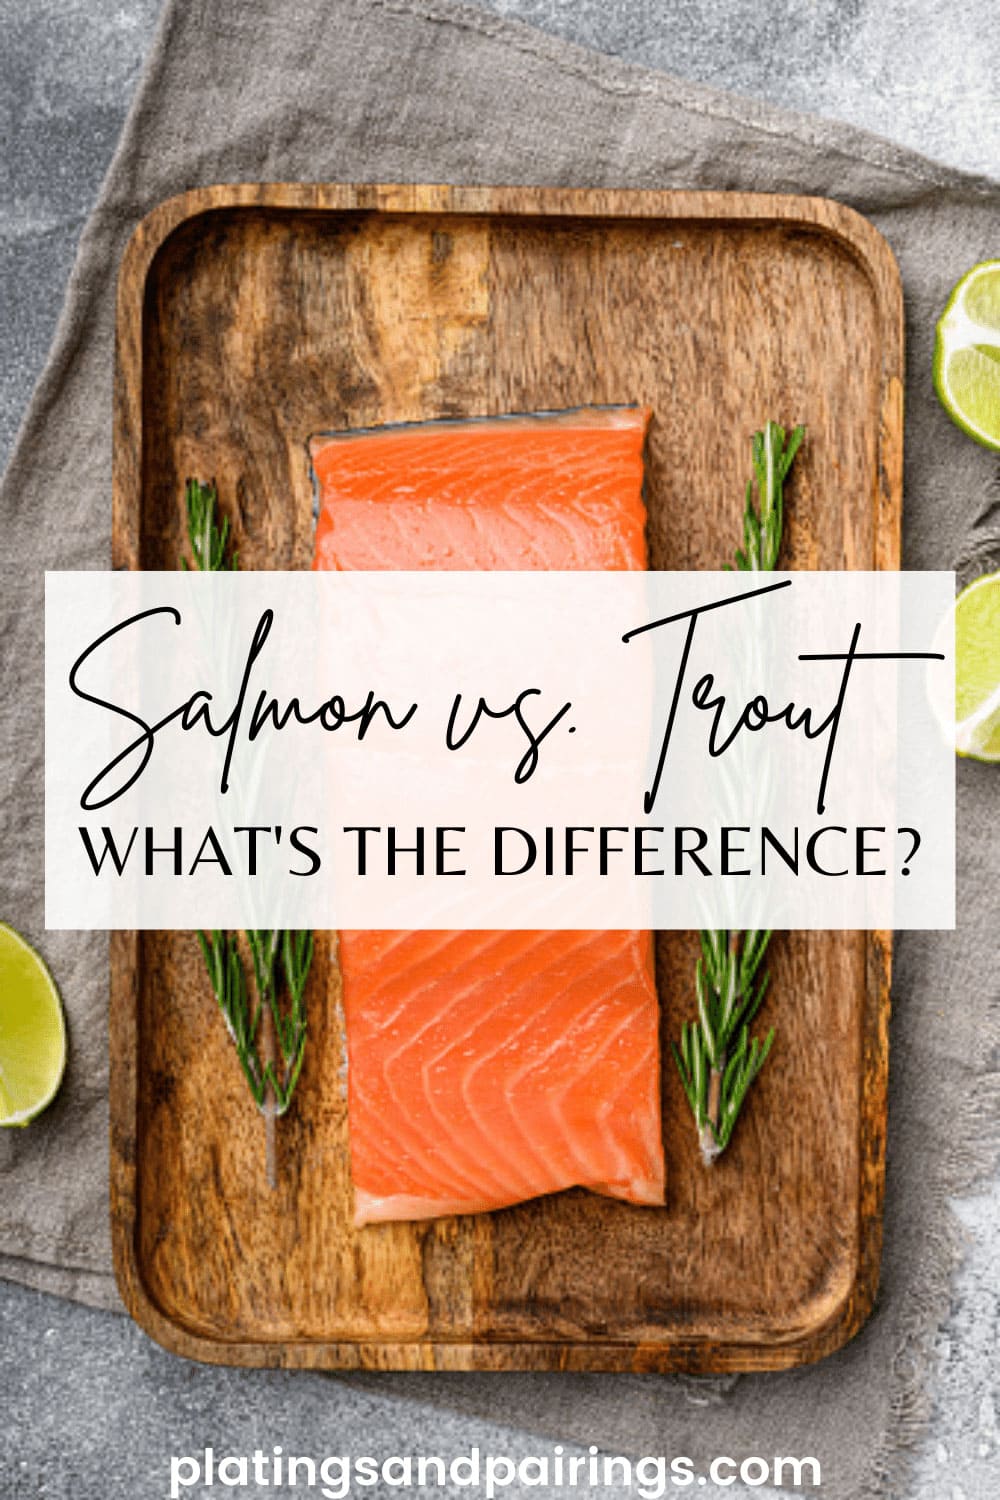 Trout vs. Salmon: The Key Differences - Platings + Pairings